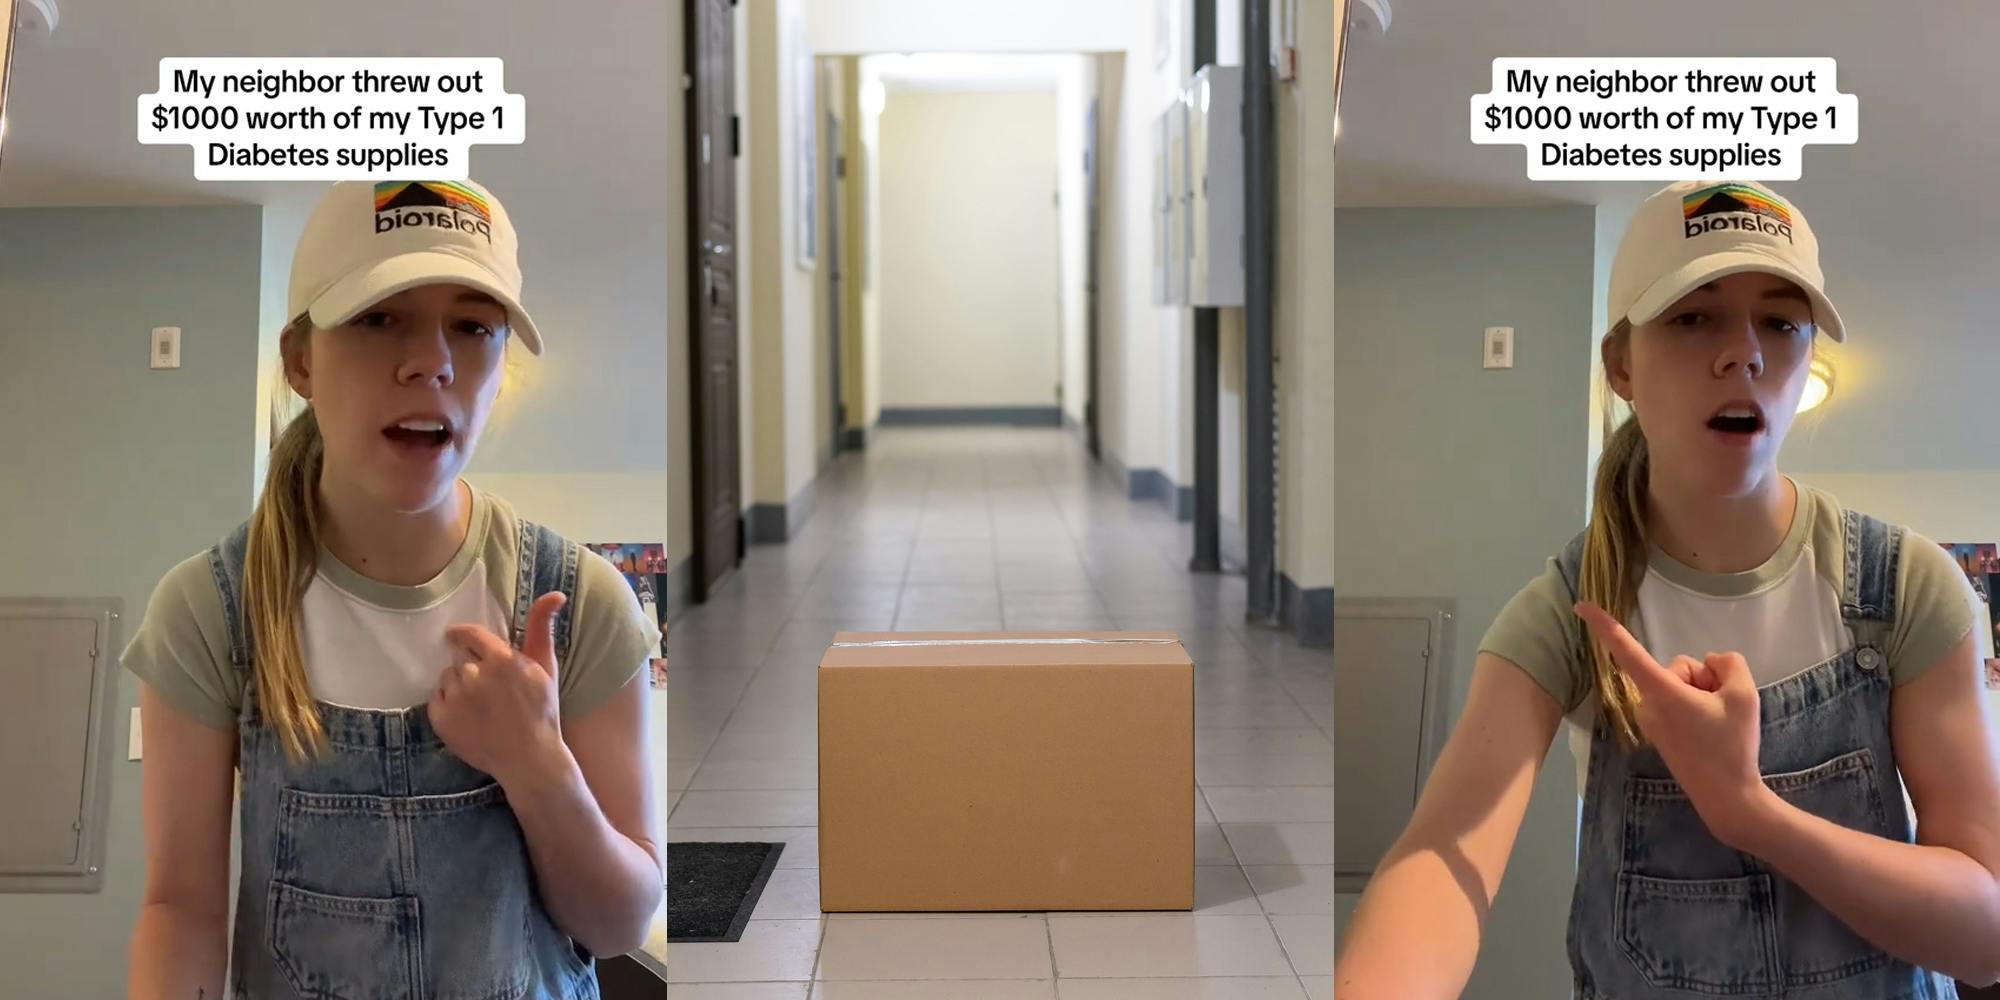 woman speaking with caption "My neighbor threw out $1000 worth of my Type 1 Diabetes supplies" (l) box in apartment hallway (c) woman speaking with caption "My neighbor threw out $1000 worth of my Type 1 Diabetes supplies" (r)